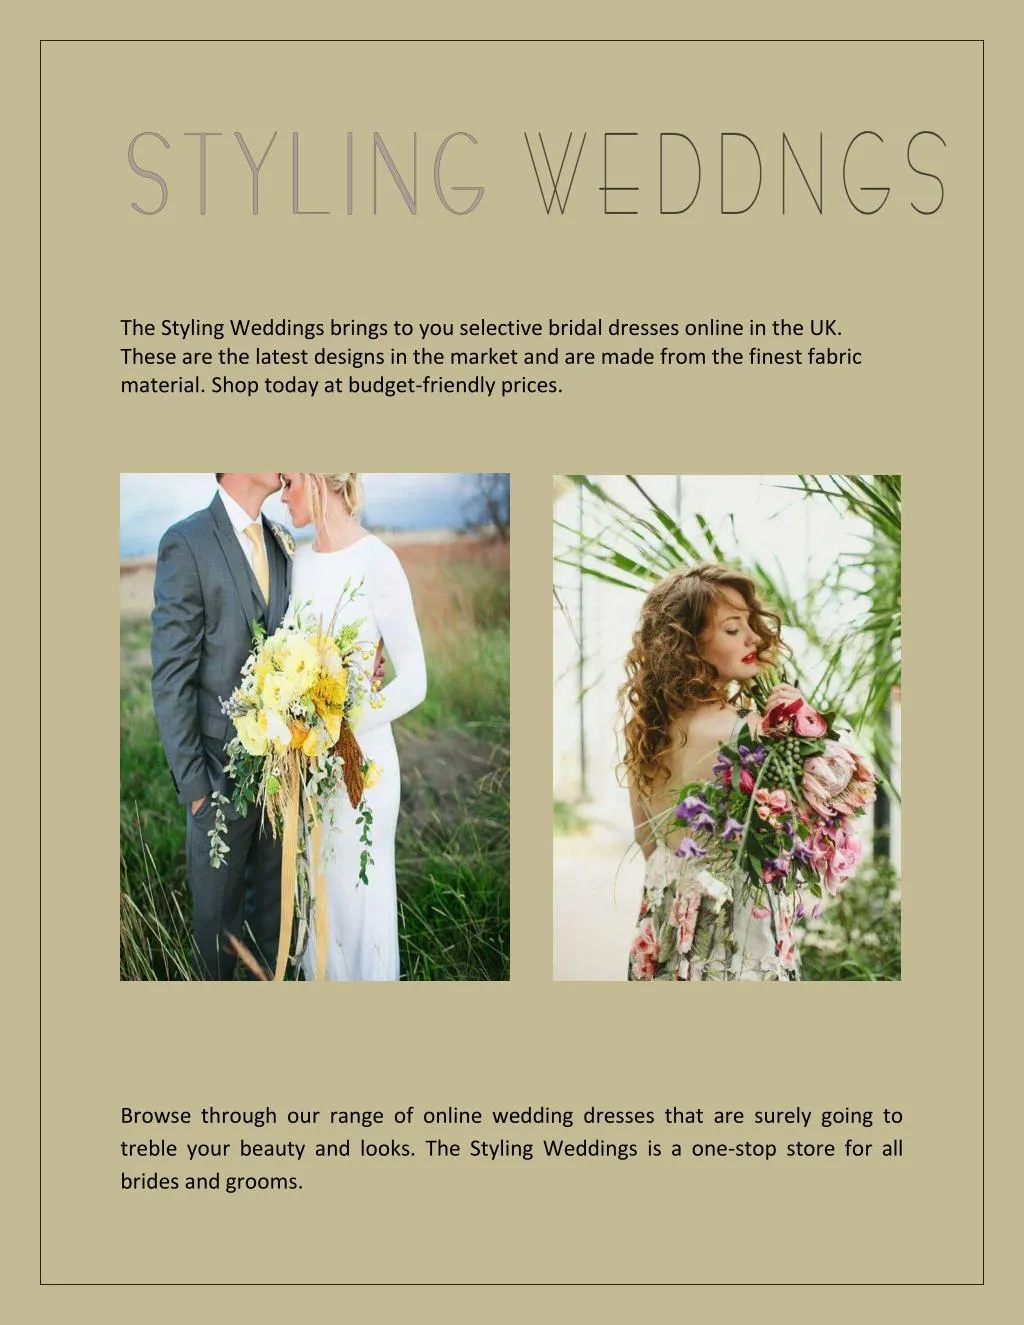 the styling weddings brings to you selective